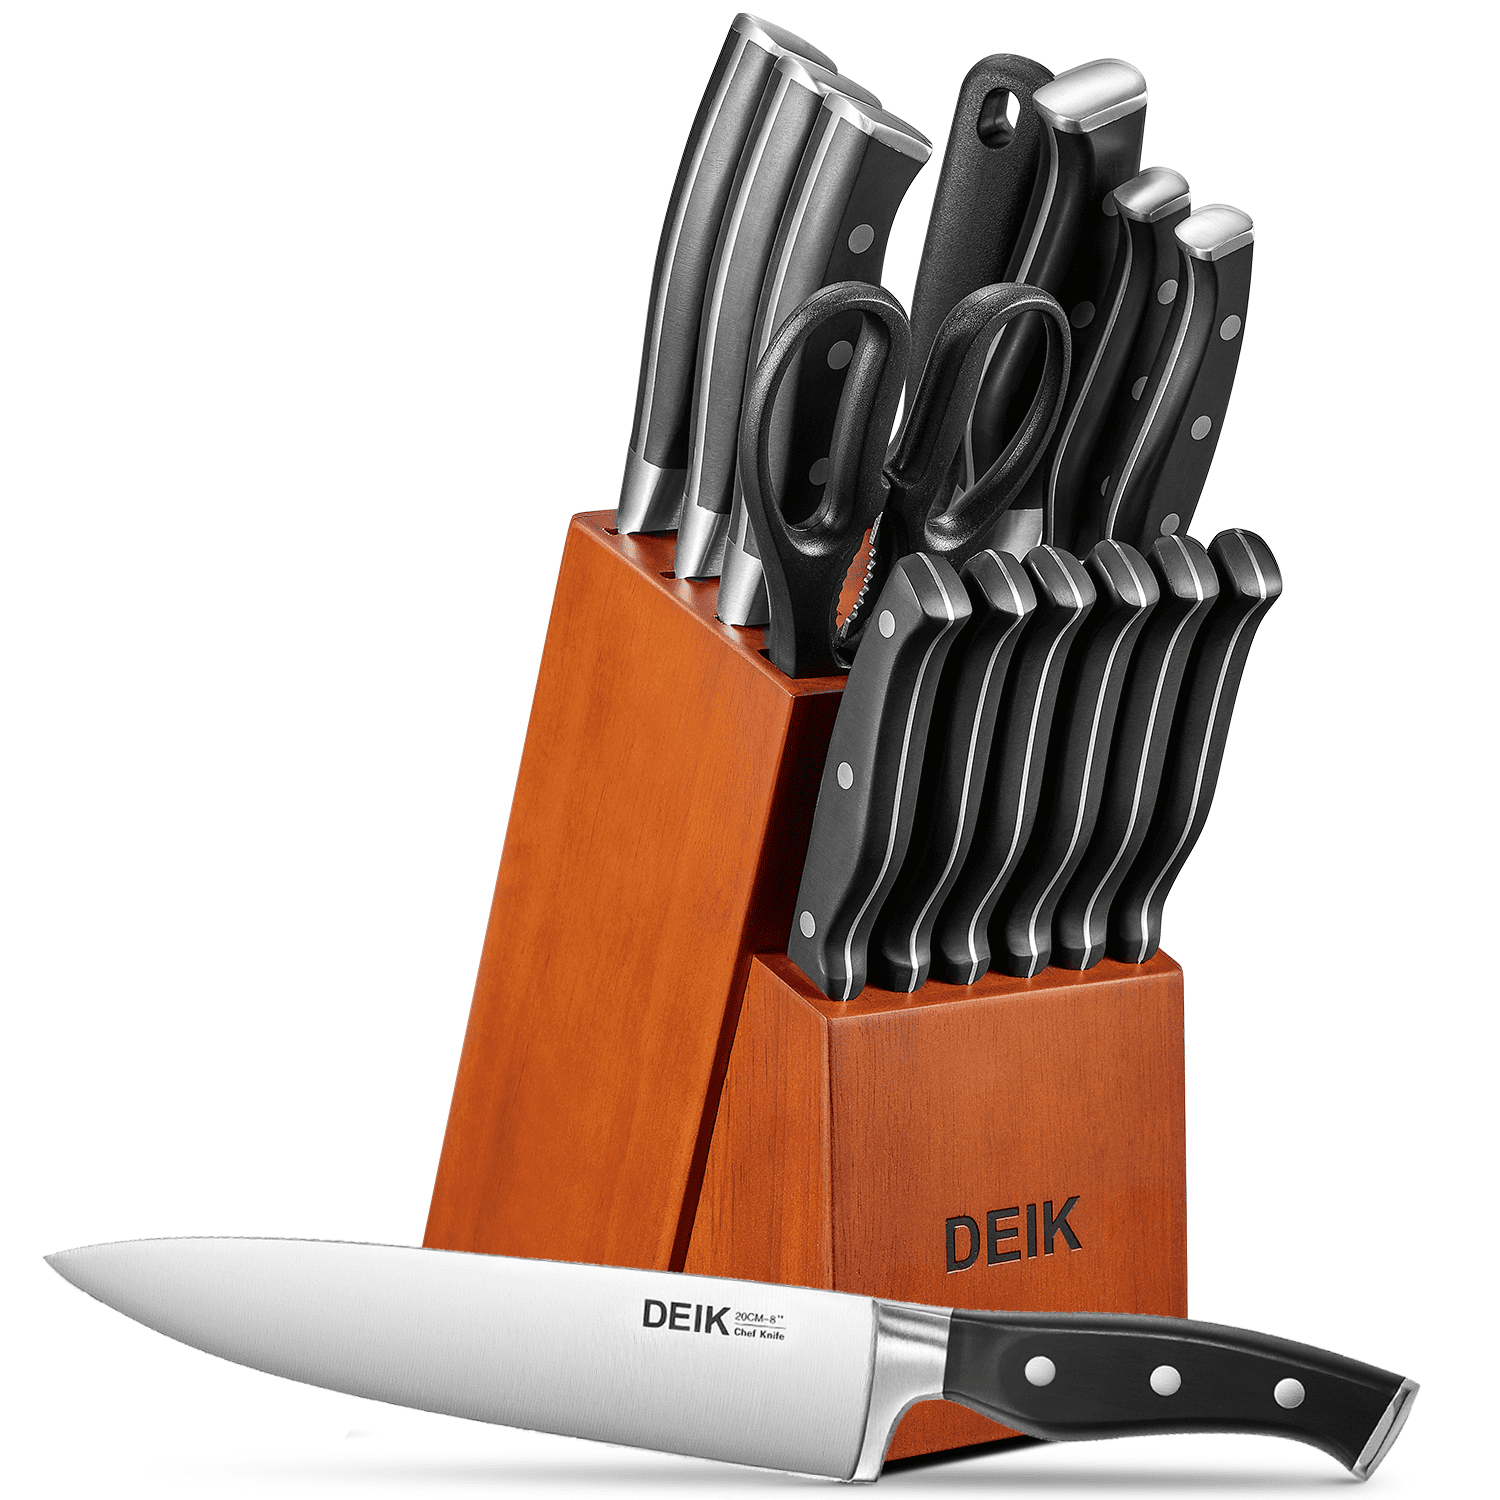 15 Pcs German Stainless Steel Knife Set with Block, Kitchen Knife